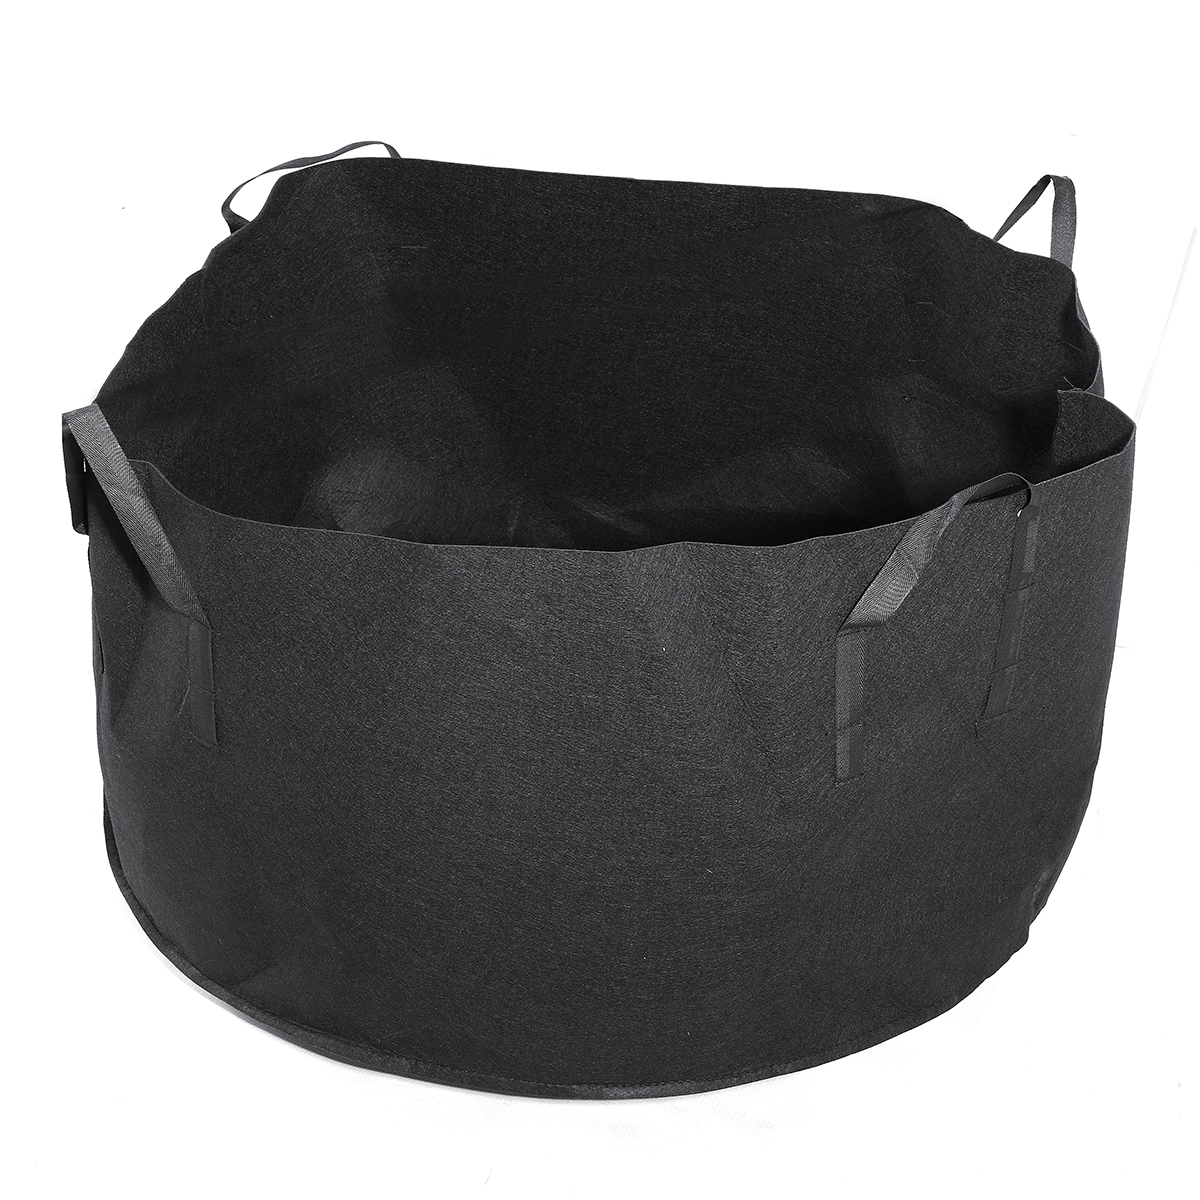 Find 1 100Gallon Potato Planting Bag Pot Planter Growing Garden Vegetable Container for Sale on Gipsybee.com with cryptocurrencies